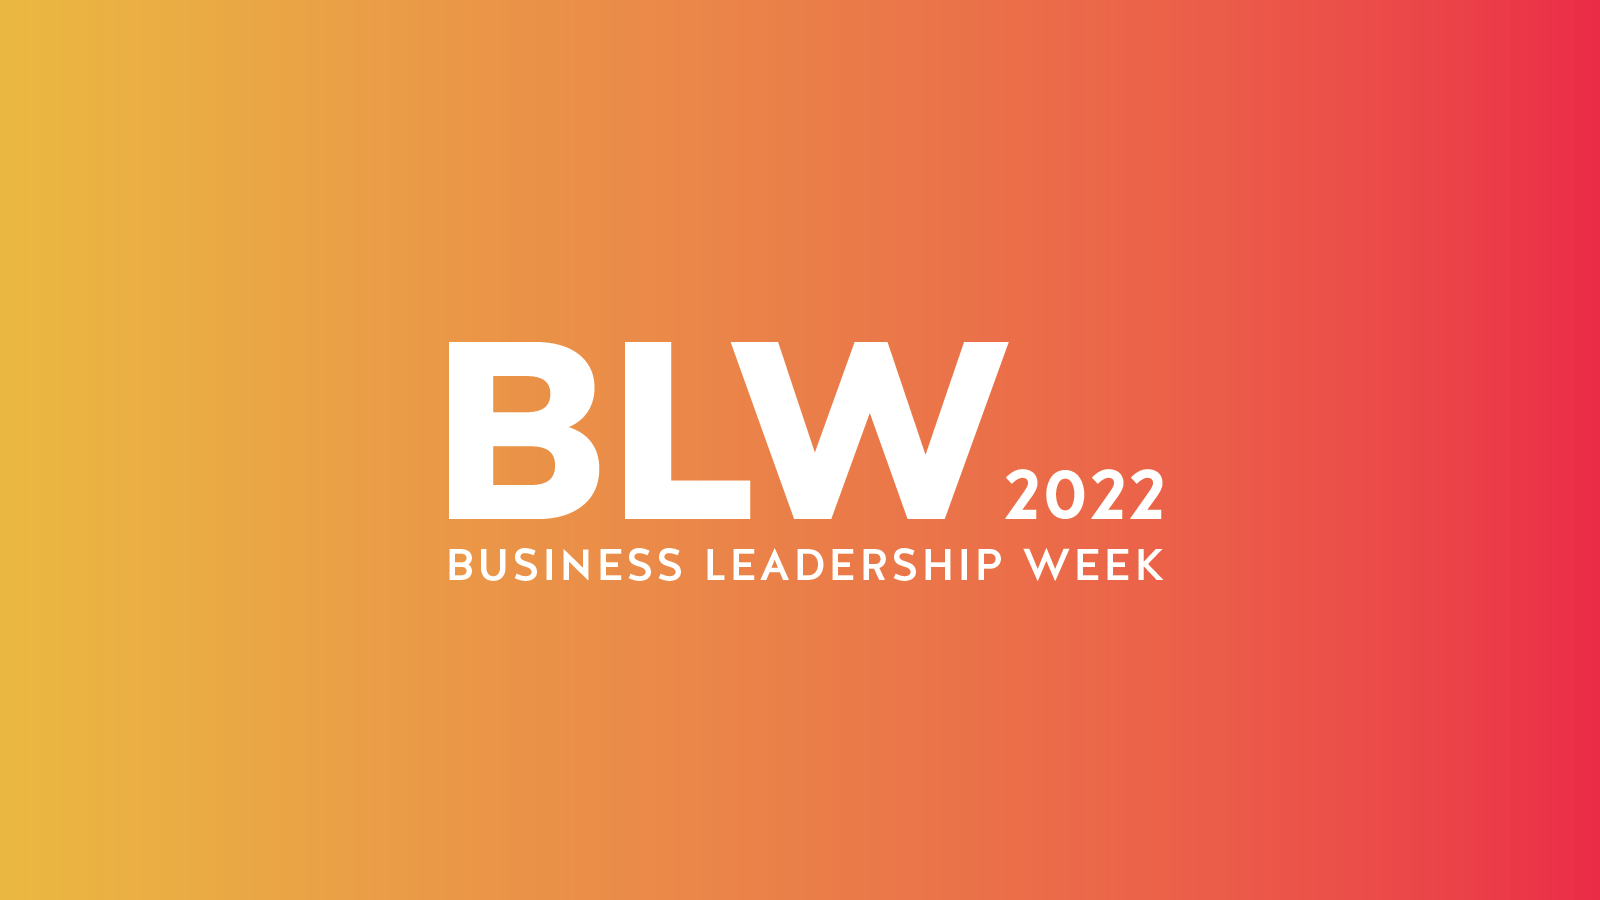 Colorful graphic with white text: "BLW 2022: Business Leadership Week"